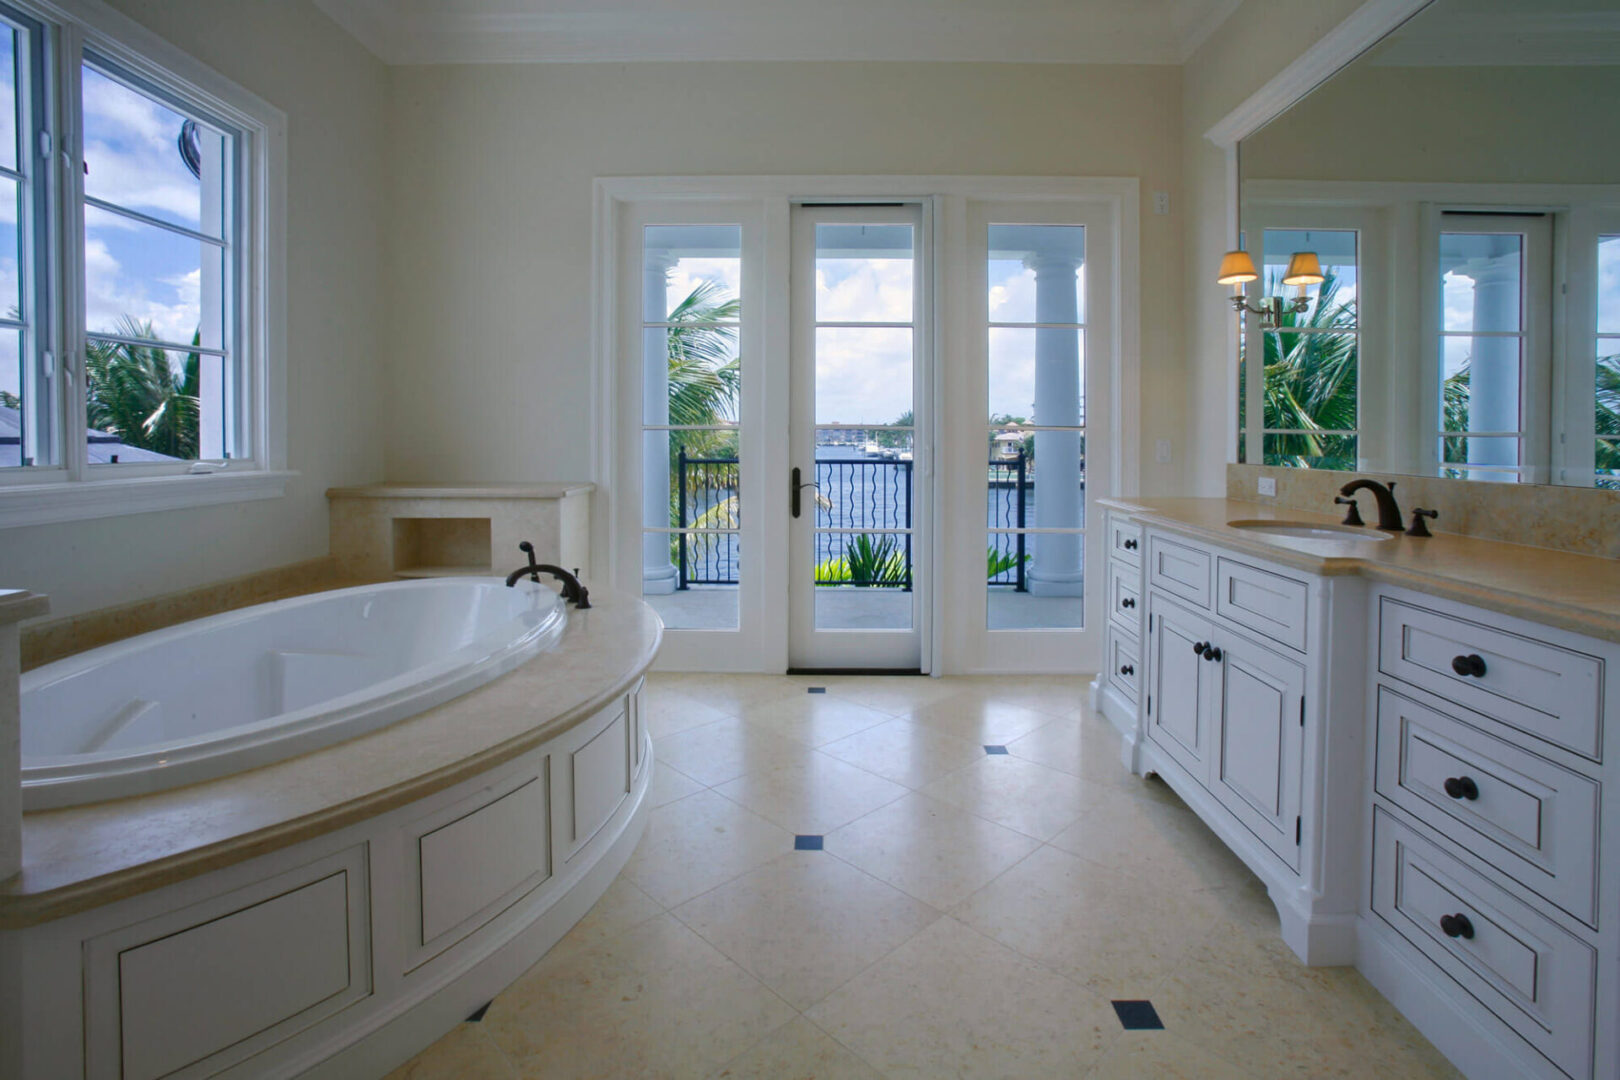 A large bathroom with a tub and sink.